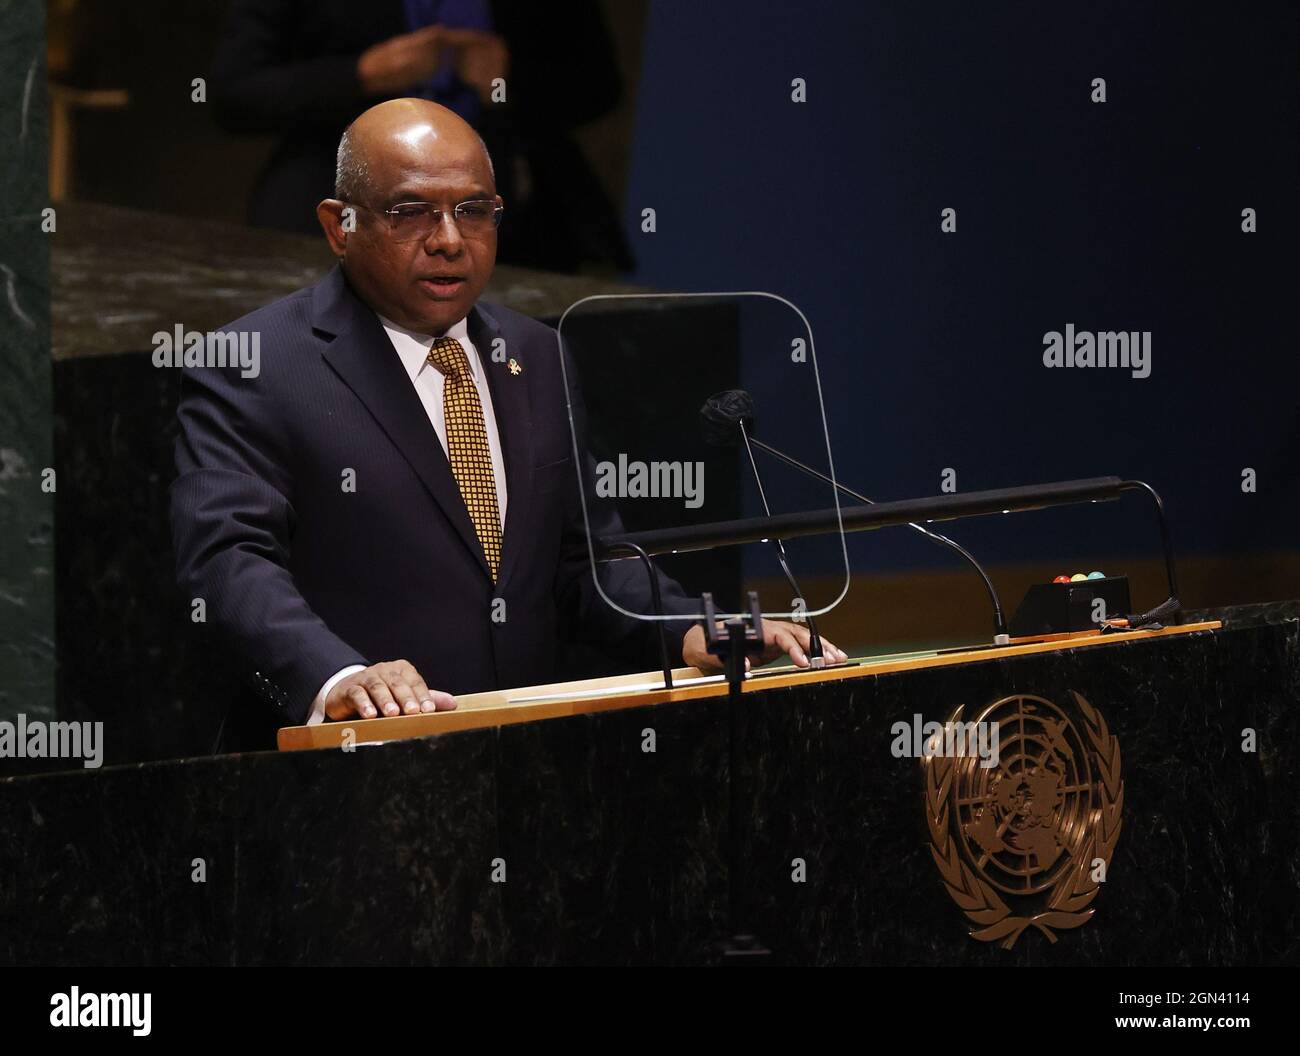 New York, United States. 22nd Sep, 2021. President of the General Assembly during the 76th session Mr. Abdulla Shahid speaks at a High-level meeting to commemorate the twentieth anniversary of the adoption of the Durban Declaration and Programme of Action: 'Reparations, racial justice and equality for people of African descent' as part of the UN General Assembly 76th session General Debate in UN General Assembly Hall at the United Nations Headquarters on Wednesday, September 22, 2021 in New York City. Photo by John Angelillo/UPI Credit: UPI/Alamy Live News Stock Photo